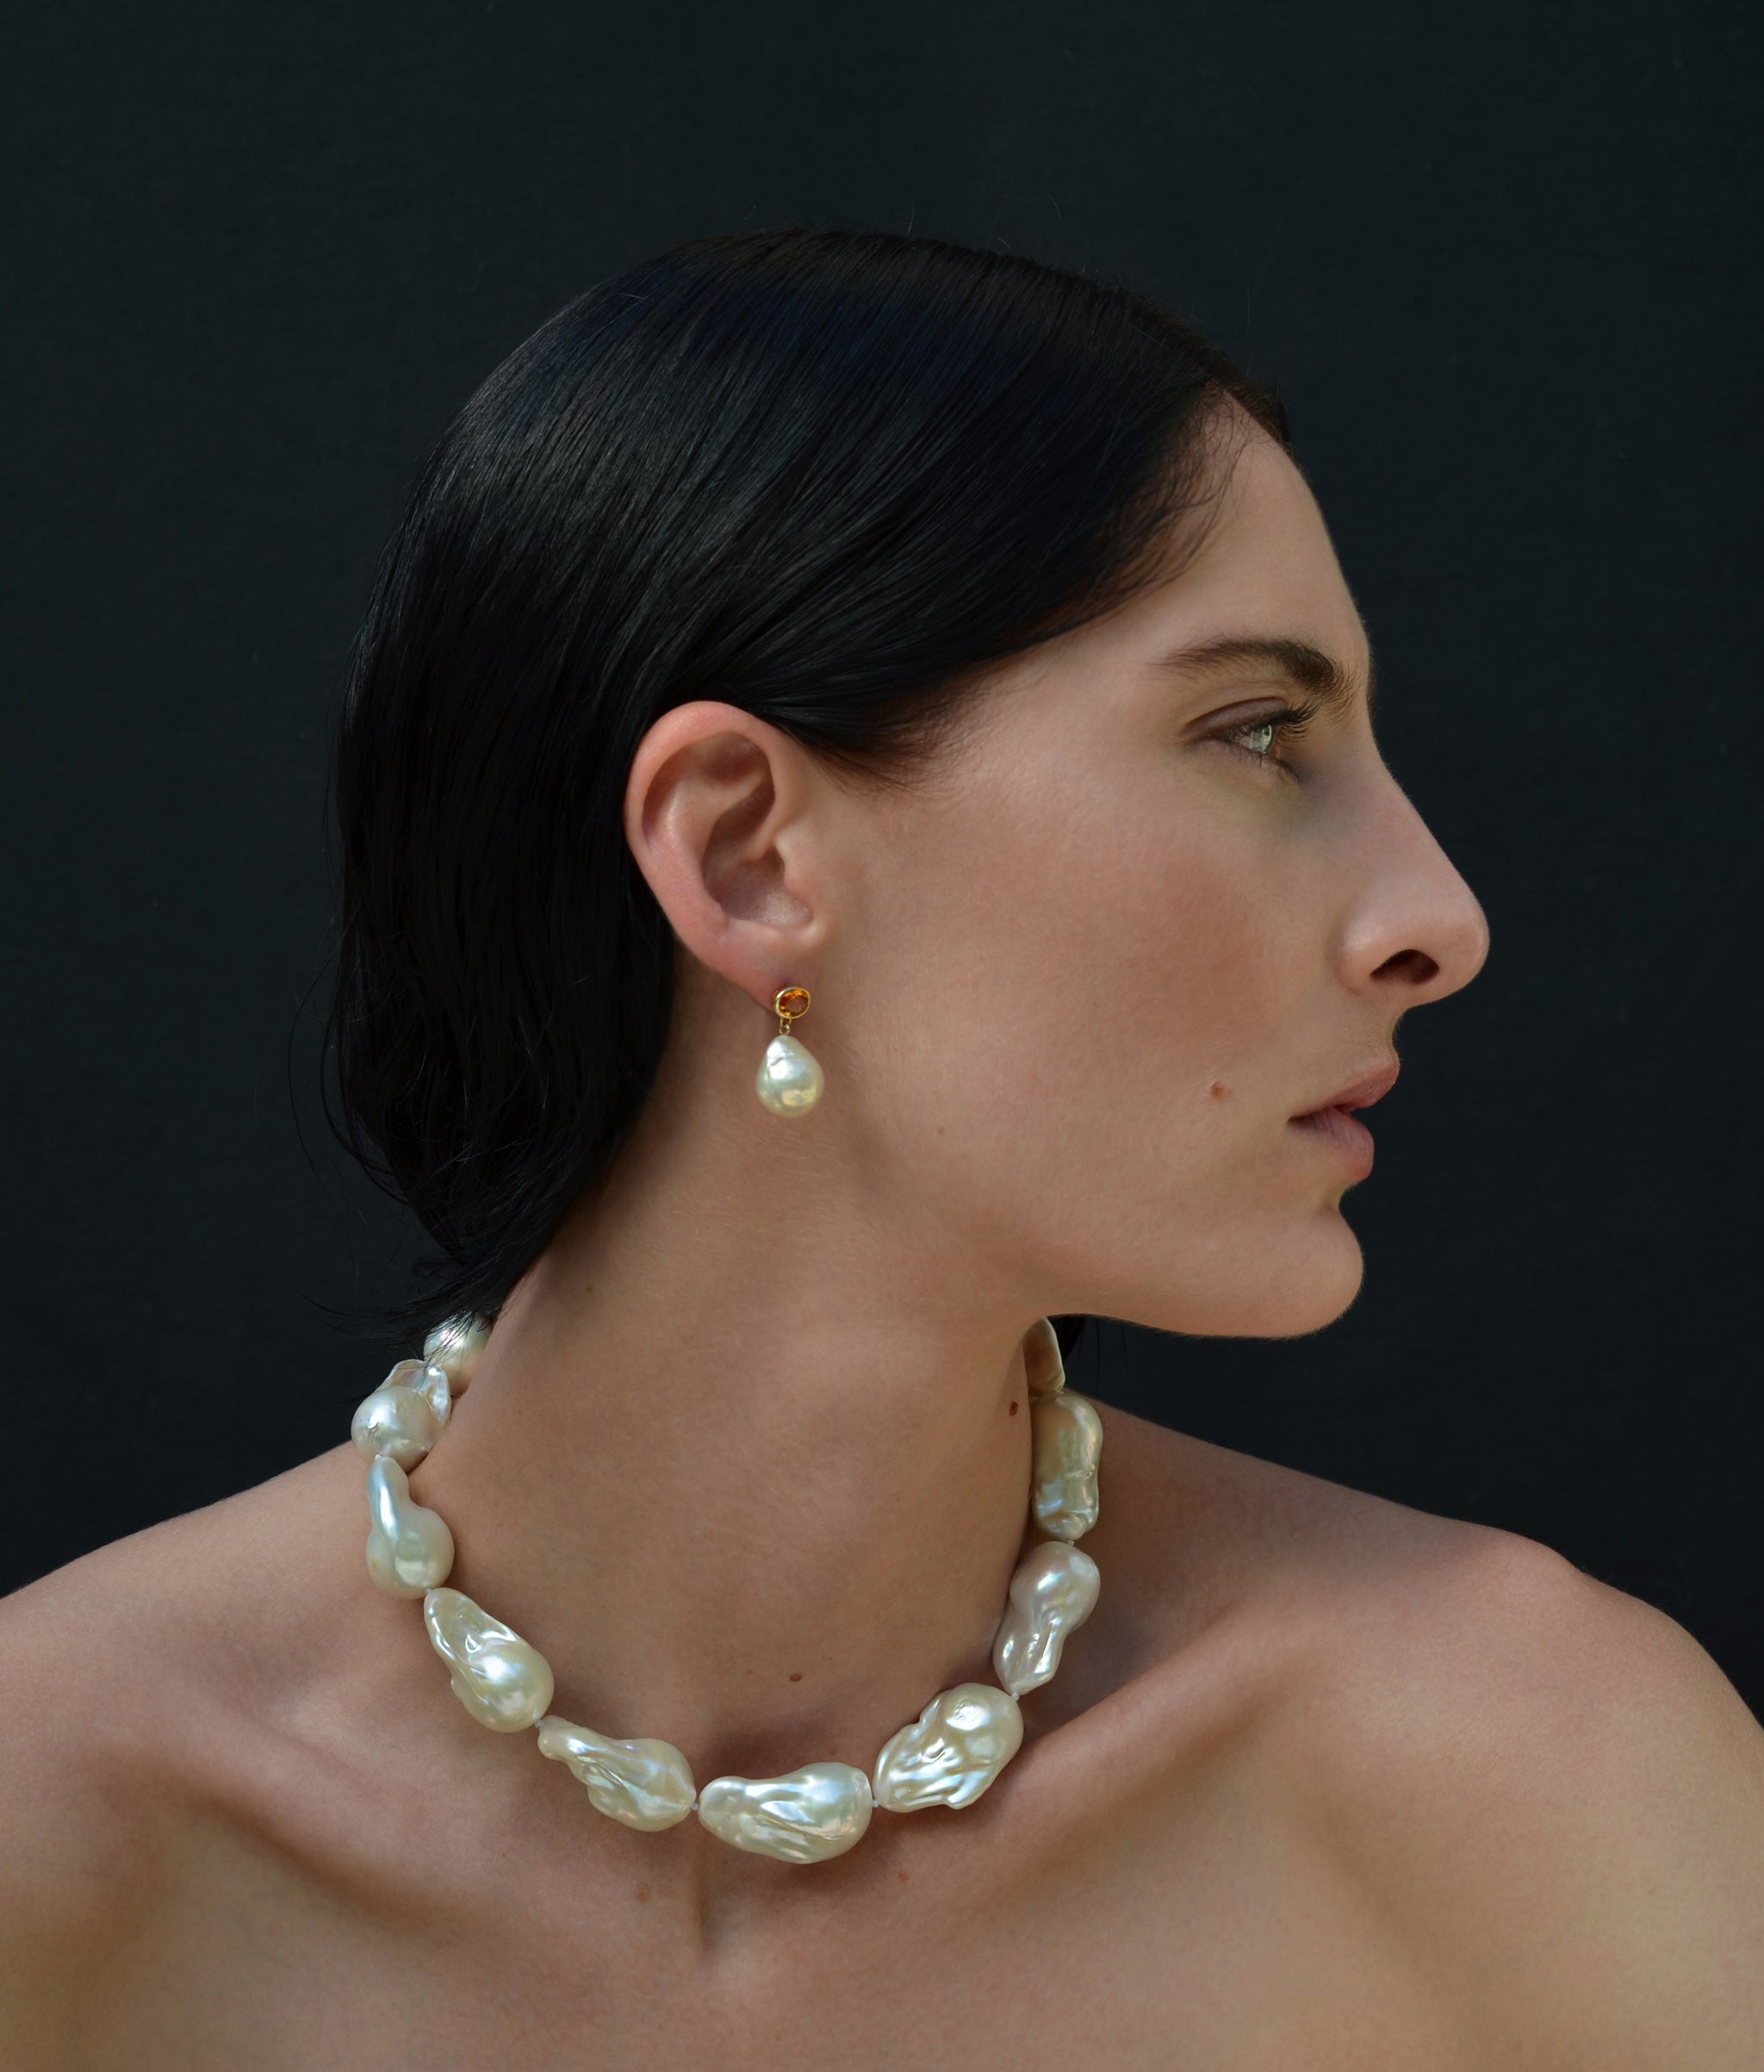 Model in profile on black backdrop wears Extra Large White Baroque Pearl Necklace and Palazzo Earrings.